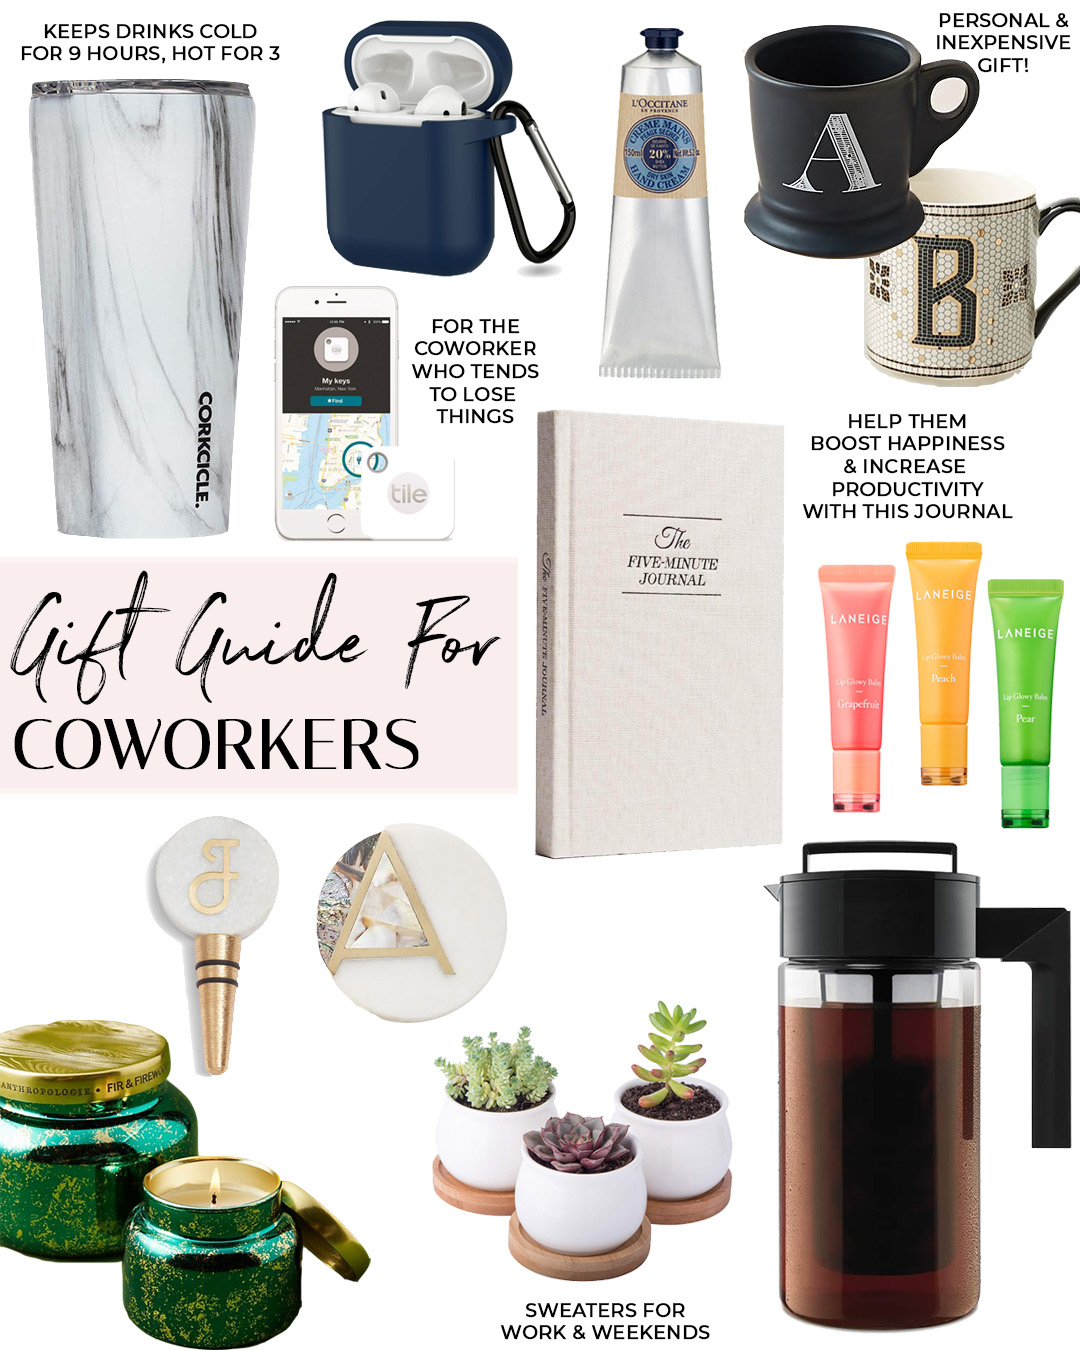 2018 Gift Guide: 30+ Gift Ideas for Coworkers, Your Boss & Beyond